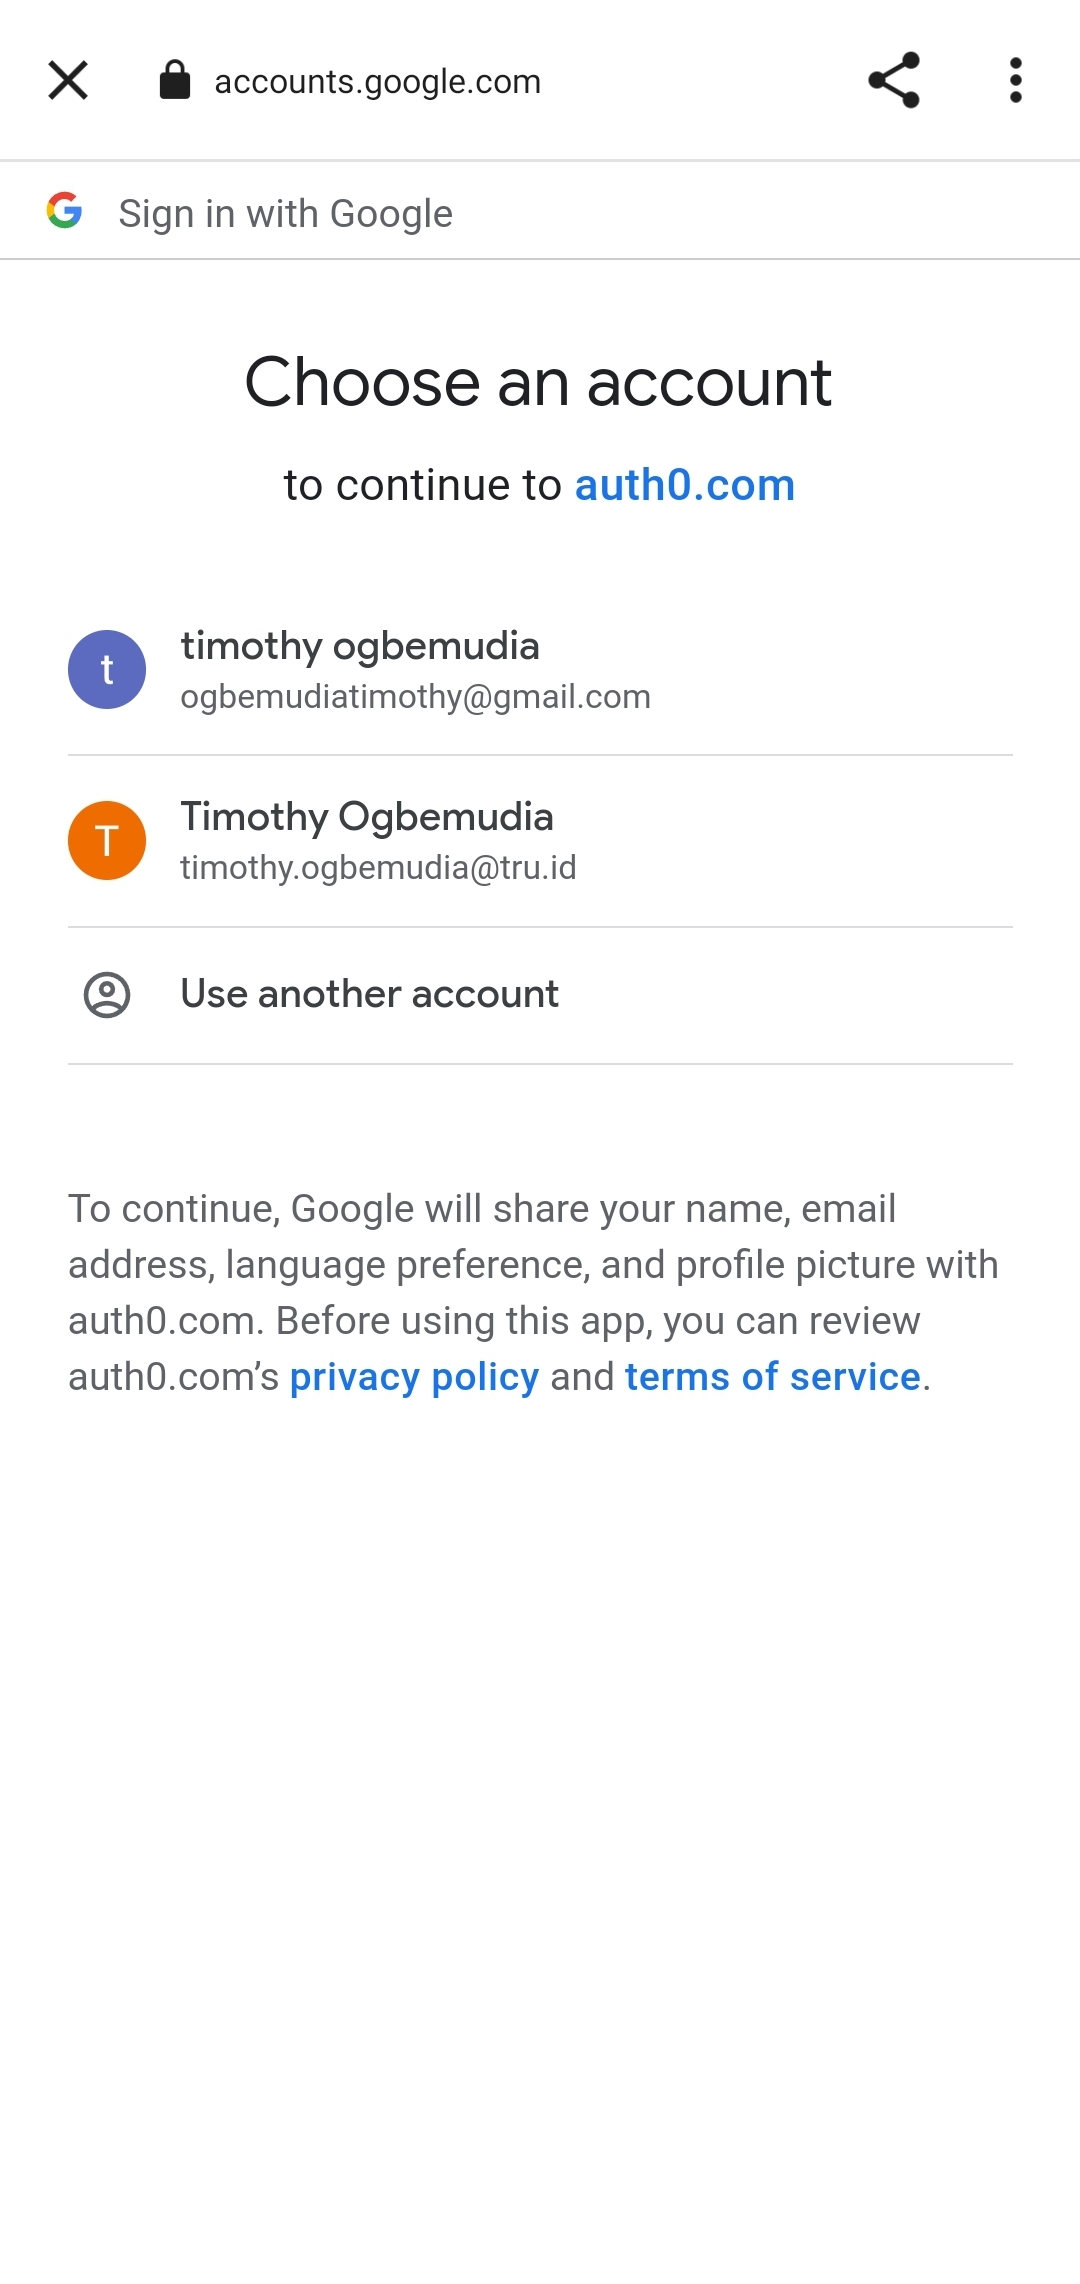 A screenshot of a mobile phone having navigated to the Google social login, to allow users to choose which Google account to authenticate with.